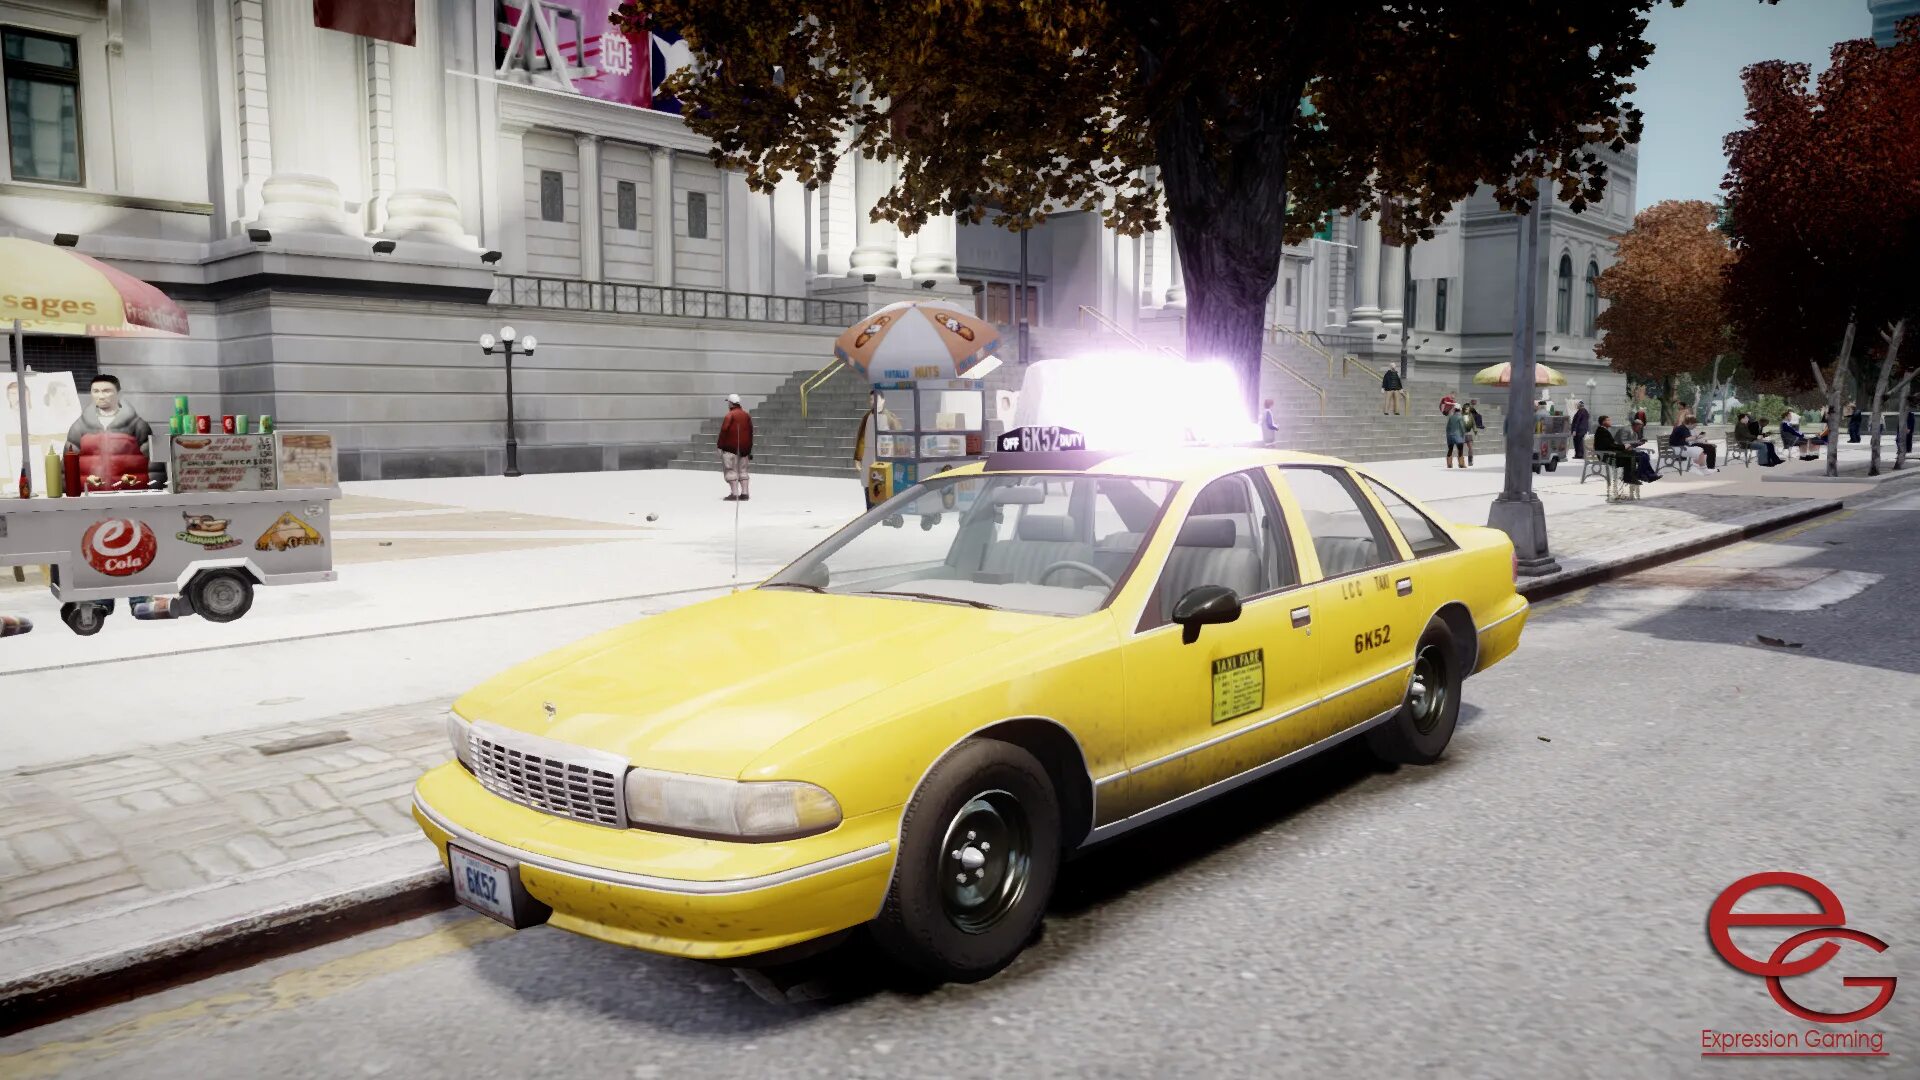 Expression games. Chevrolet Caprice 1993 NYC Taxi. GTA 5 Chevrolet Caprice Taxi. Chevrolet Caprice 4 Taxi. ГТА 4 Chevrolet Caprice.